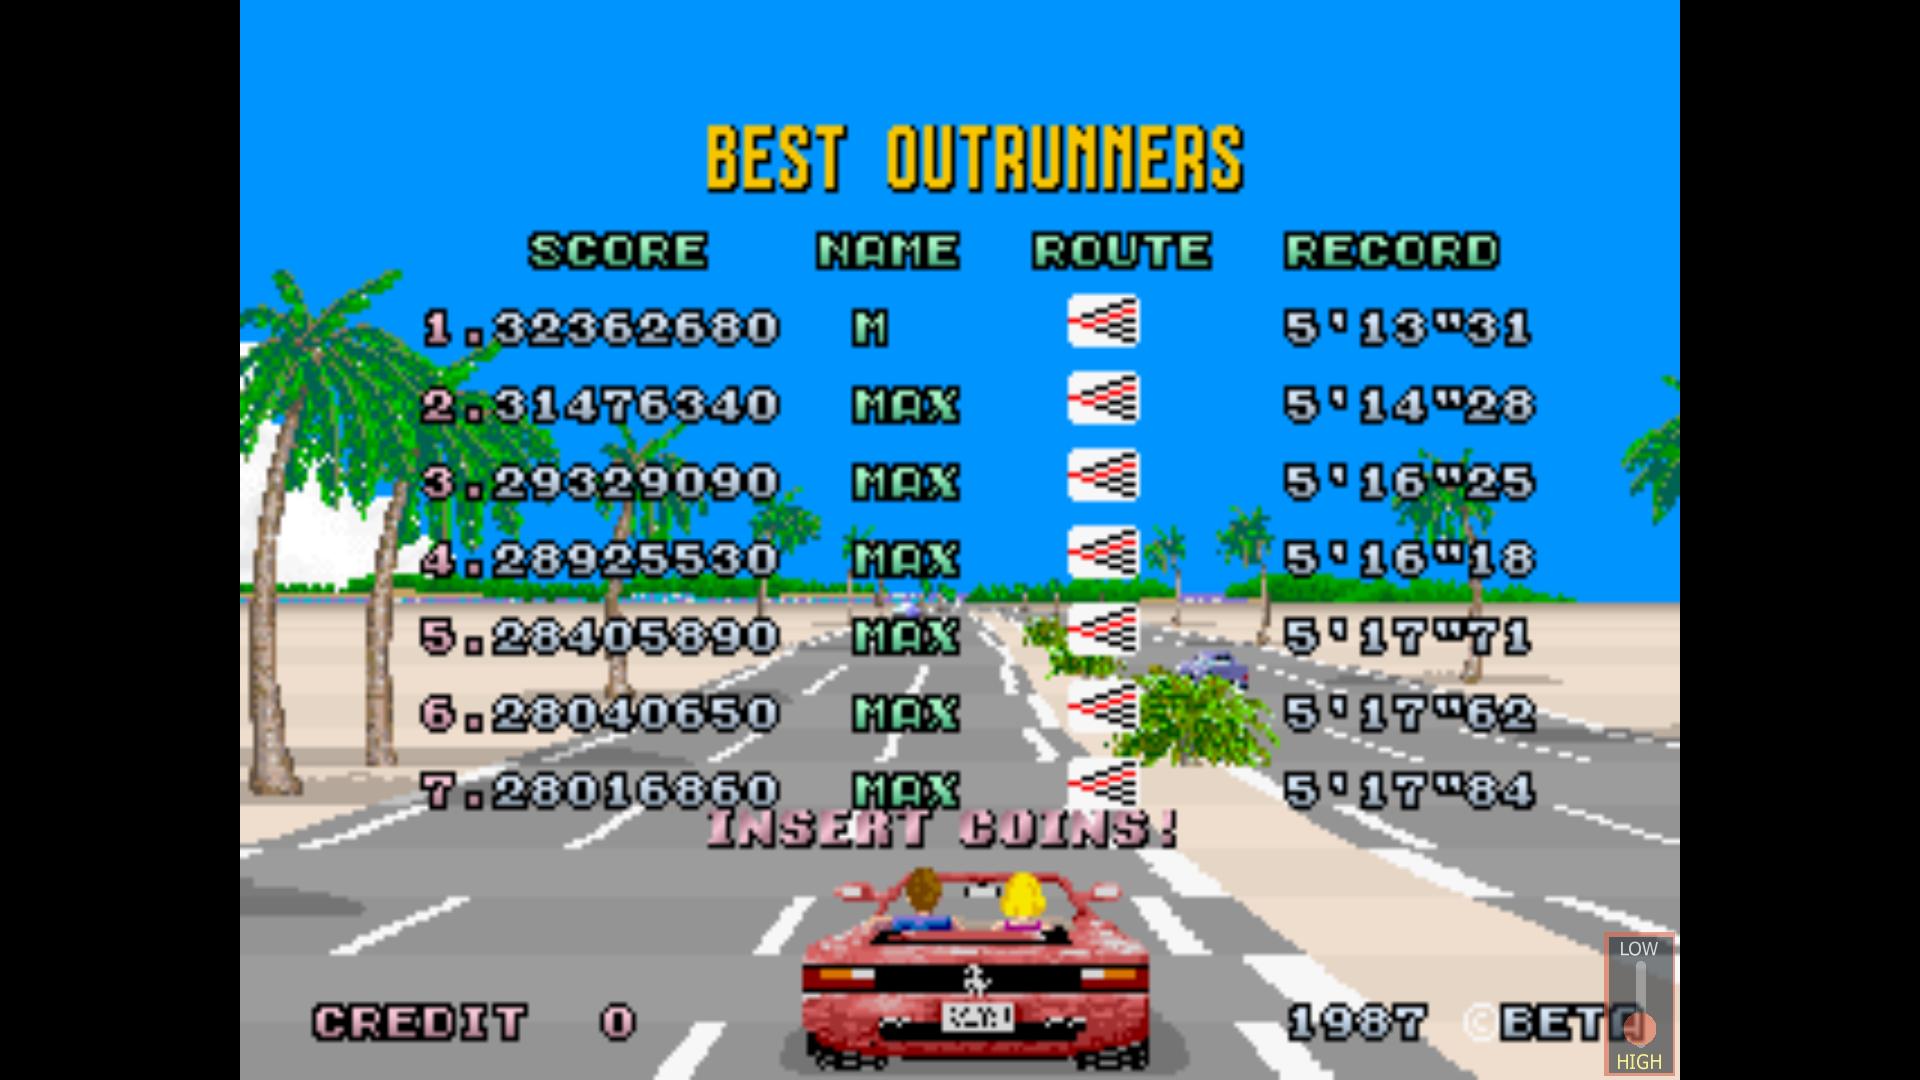 Maxwel: Outrun (Arcade Emulated / M.A.M.E.) 32,362,680 points on 2015-09-16 04:16:04